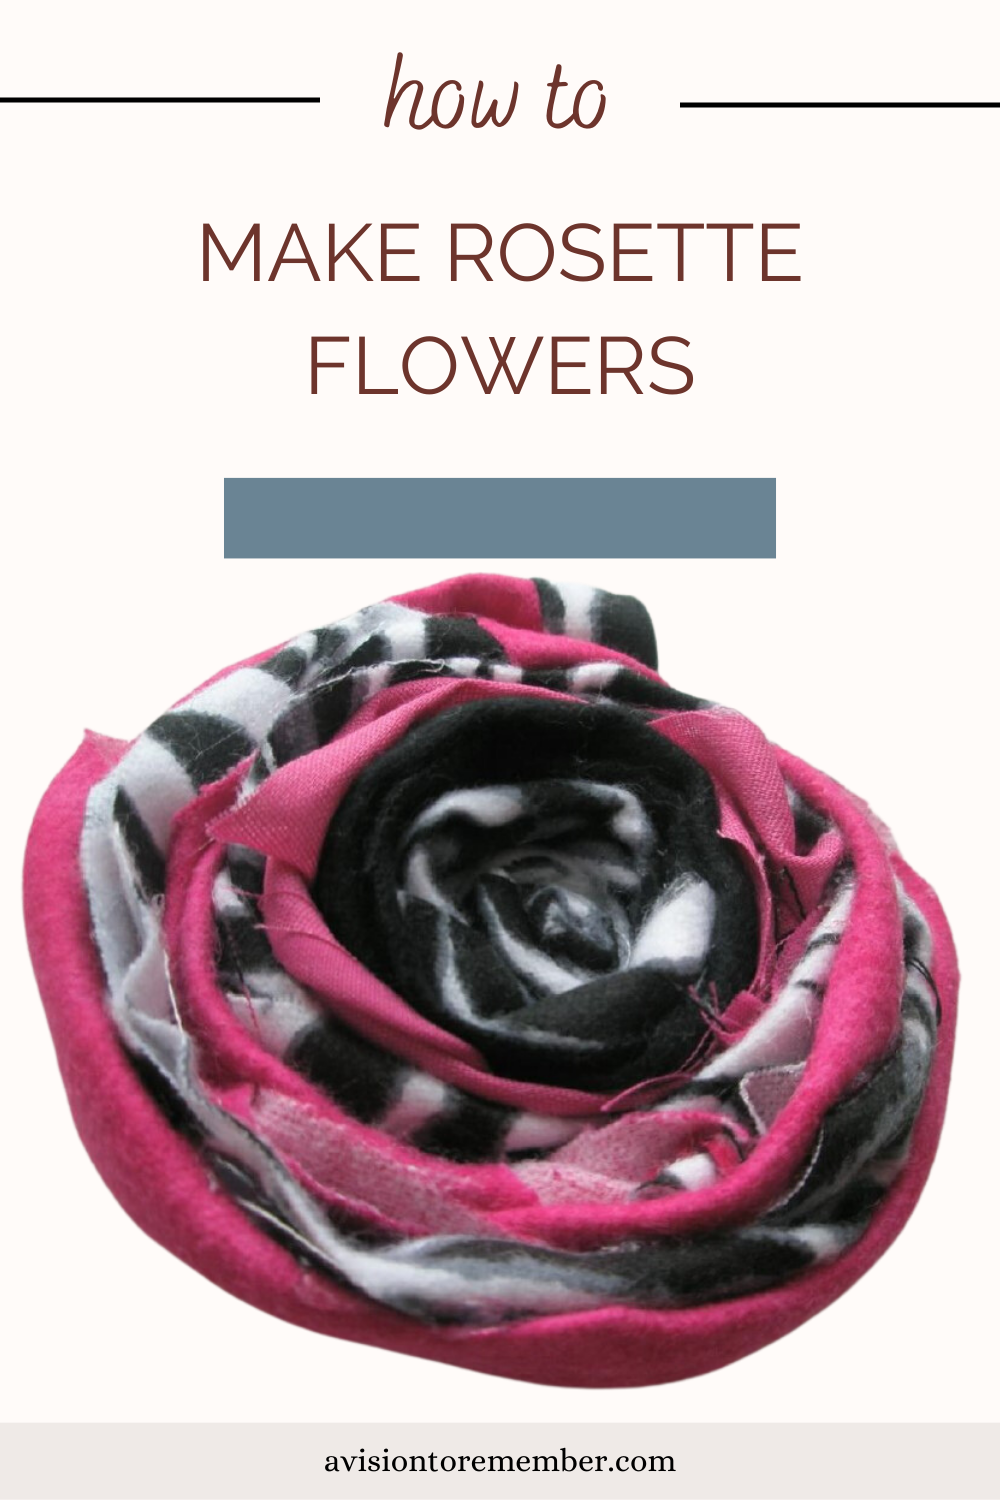 A Vision to Remember All Things Handmade Blog: DIY Flower Patterns